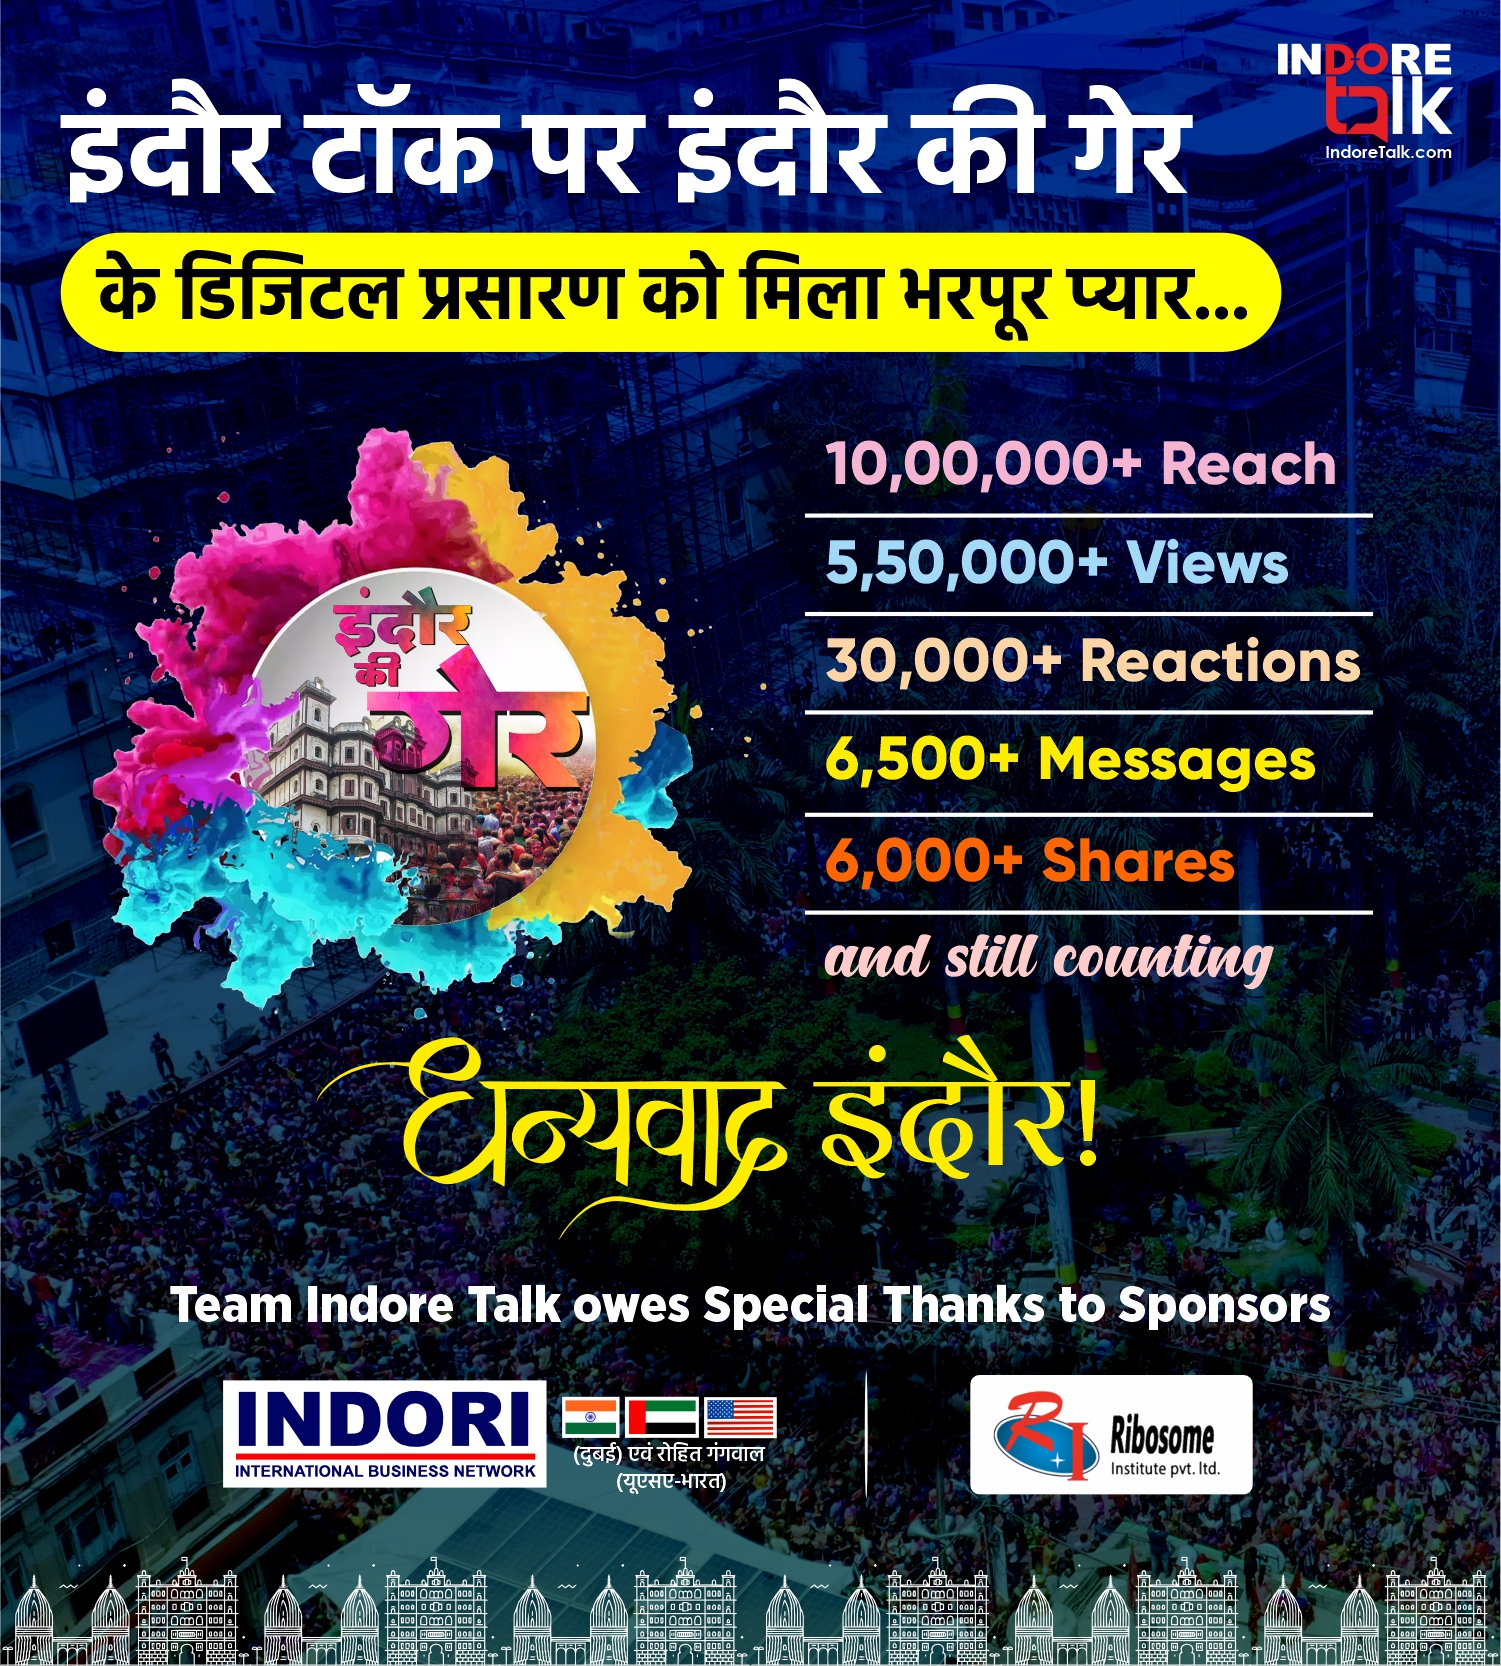 IndoreTalk and HBTV's Live Broadcast of Indore ki Ger 2024 Mesmerizes Viewers across the Globe.